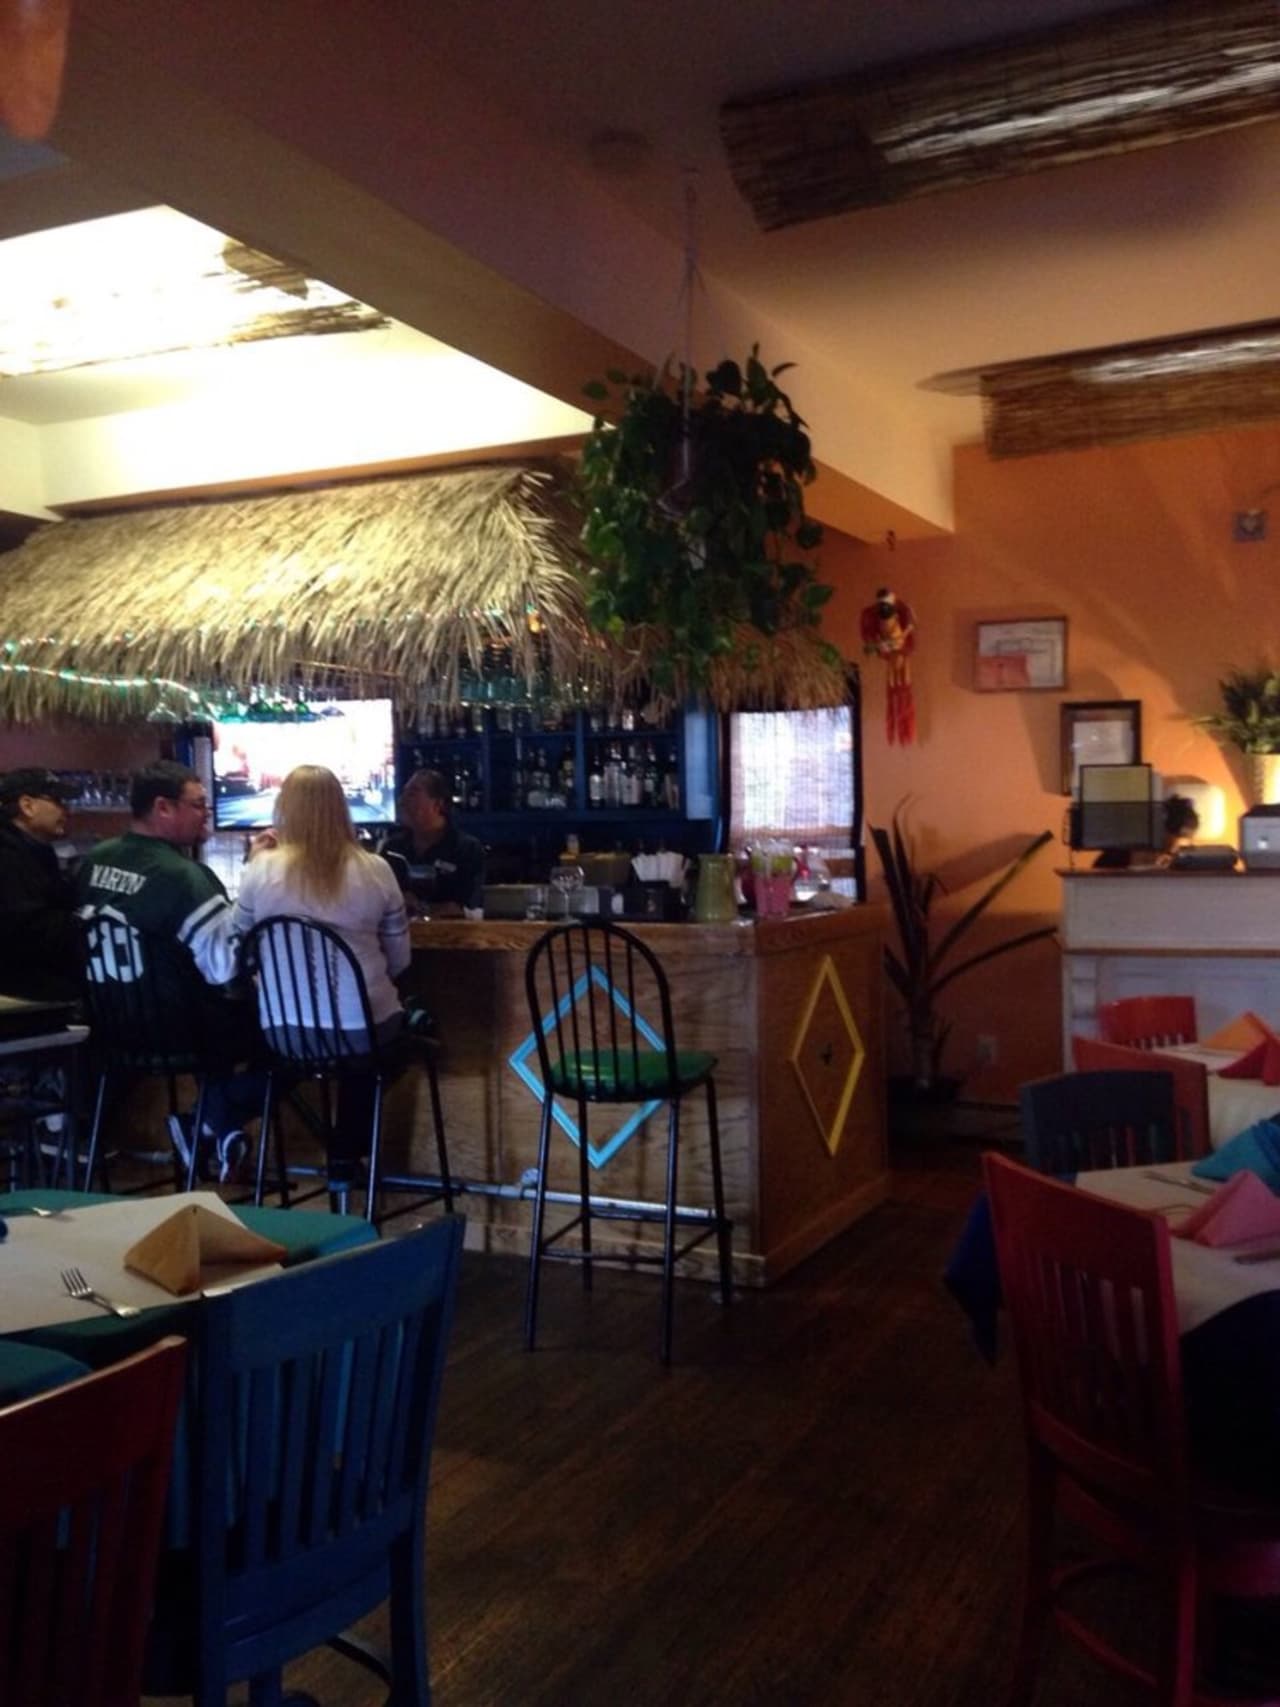 The owners of the Cancun Inn, a longtime Mexican restaurant in Sugar Loaf, say they are being harassed after they kicked out two patrons for, it said, being rude. The pair claim they were bounced because one of them was wearing pro-Donald Trump gear.